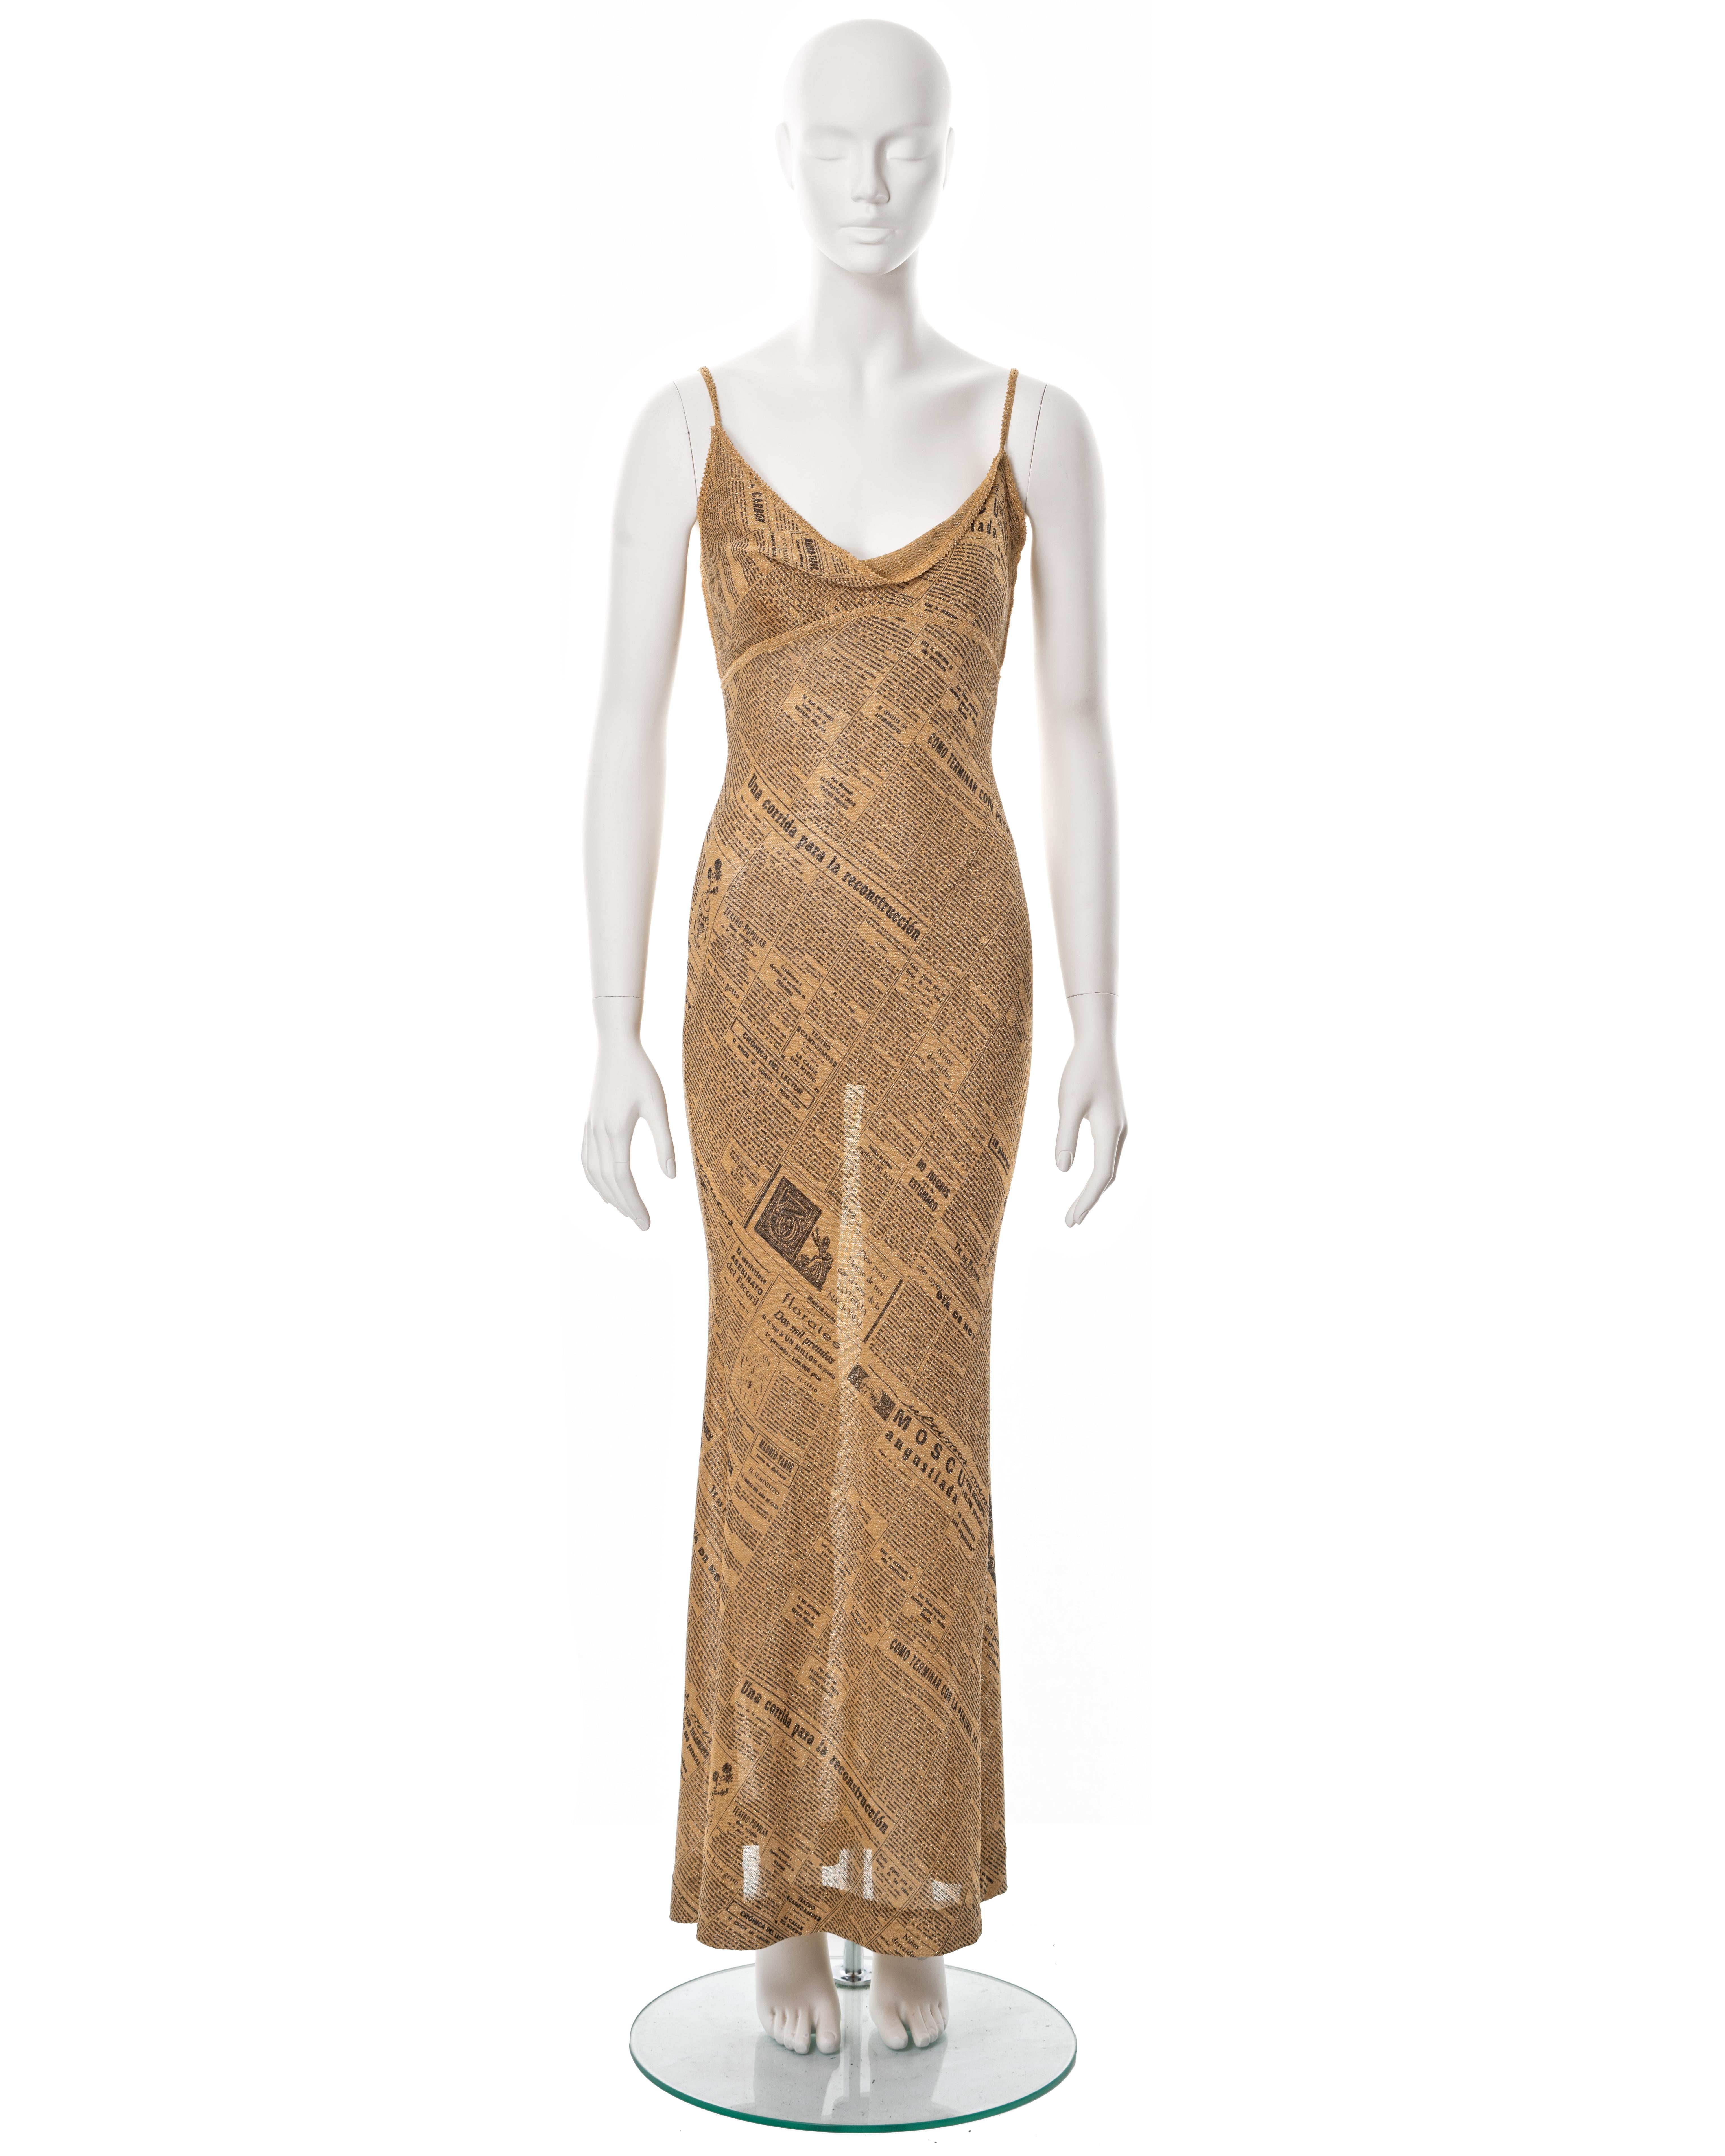 ▪ John Galliano evening dress
▪ Sold by One of a Kind Archive
▪ Spring-Summer 2001
▪ Constructed from gold bias-cut knitted lurex with a black newsprint motif
▪ Asymmetric cowl neck
▪ Spaghetti straps
▪ Flared maxi skirt
▪ Size approx. Medium 
▪